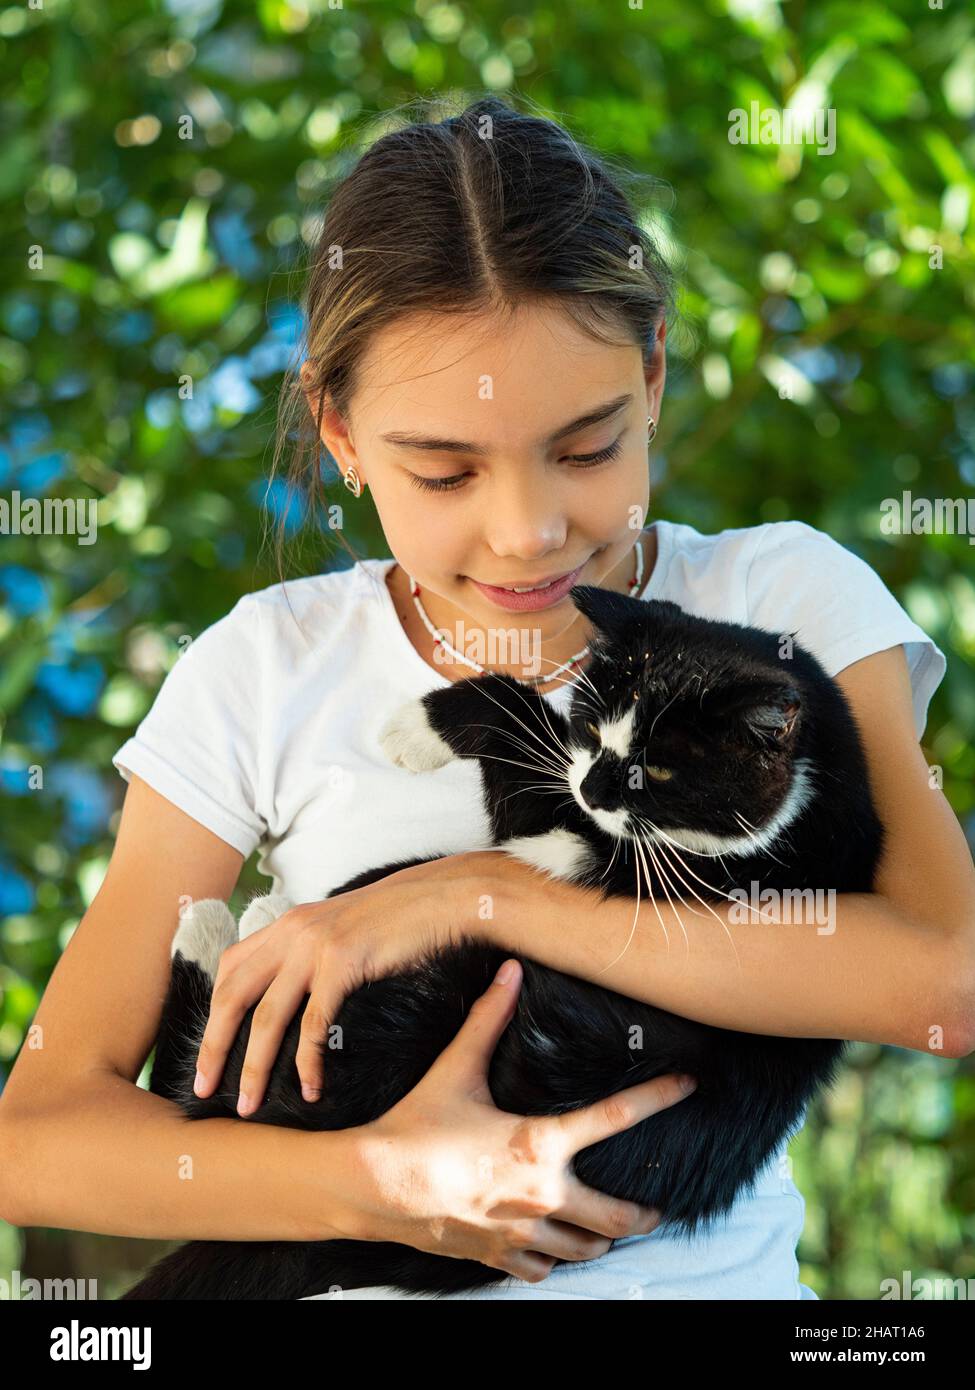 The girl holds a black stray cat in her arms and looks at him. Animal care concept. Stock Photo